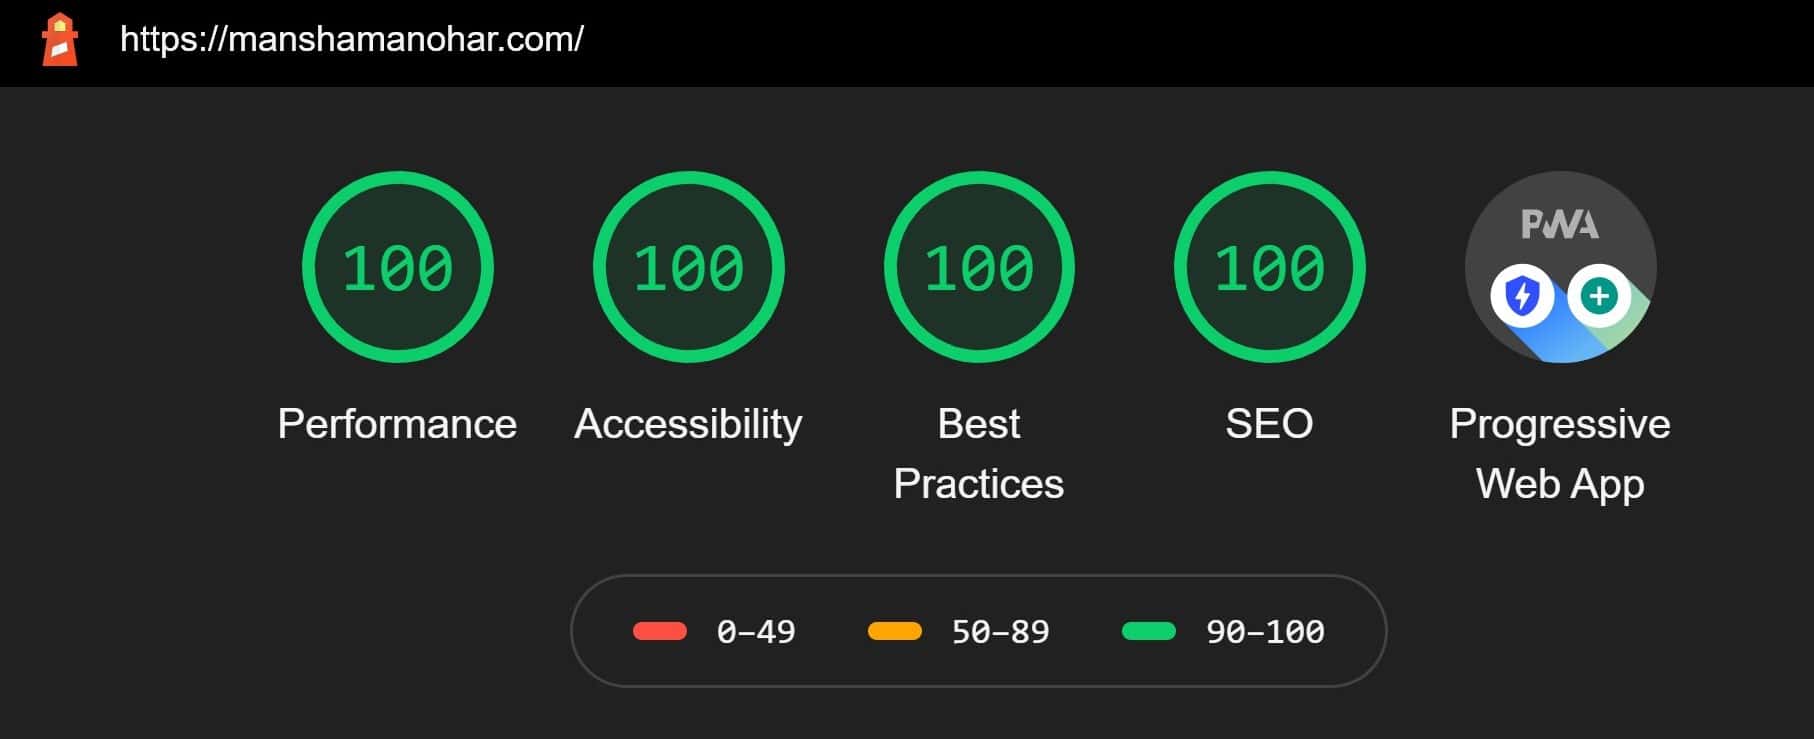 Screenshot of the website's Lighthouse audit result showing 100% across performance, accessibility, best practices and SEO.